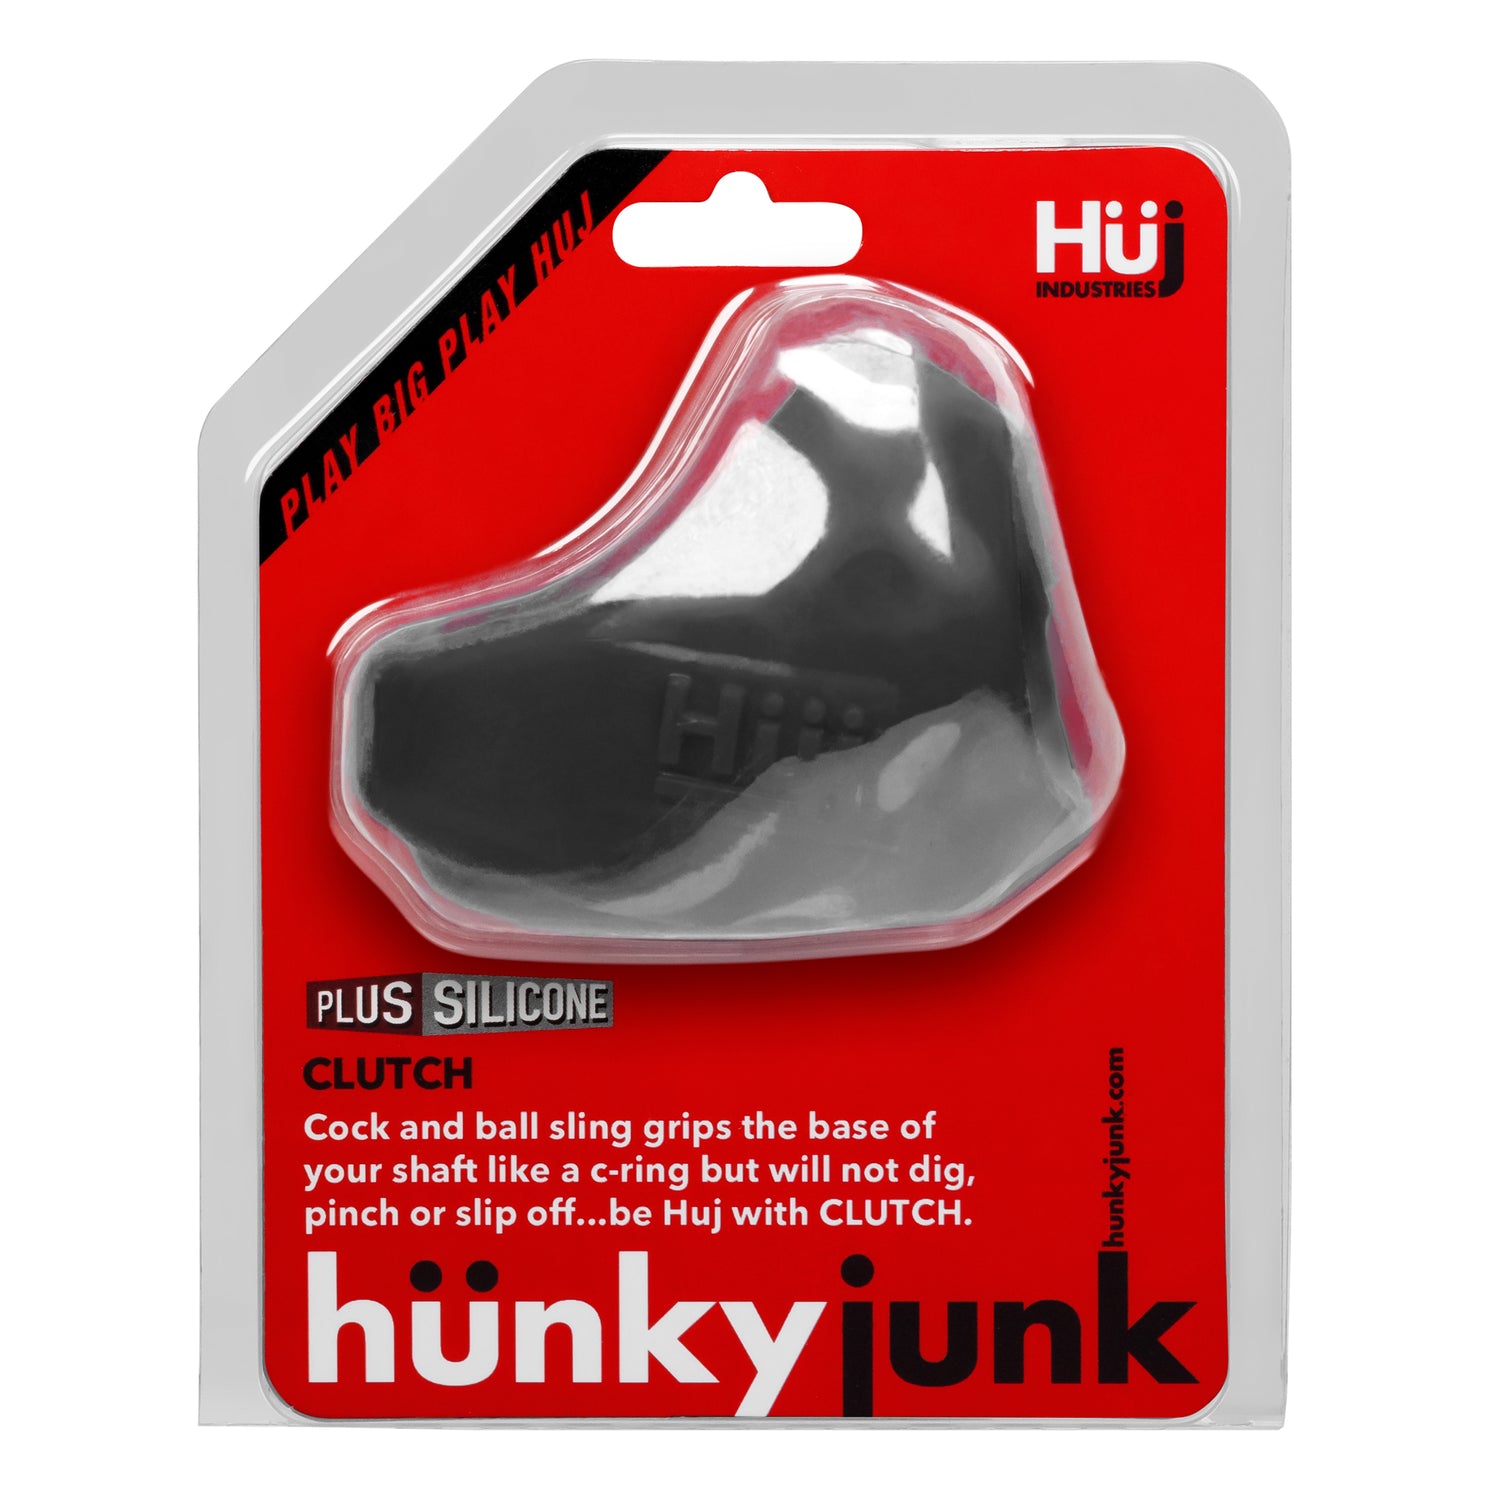 CLUTCH Cock/Ball Sling by Hunkyjunk Tar - Just for you desires